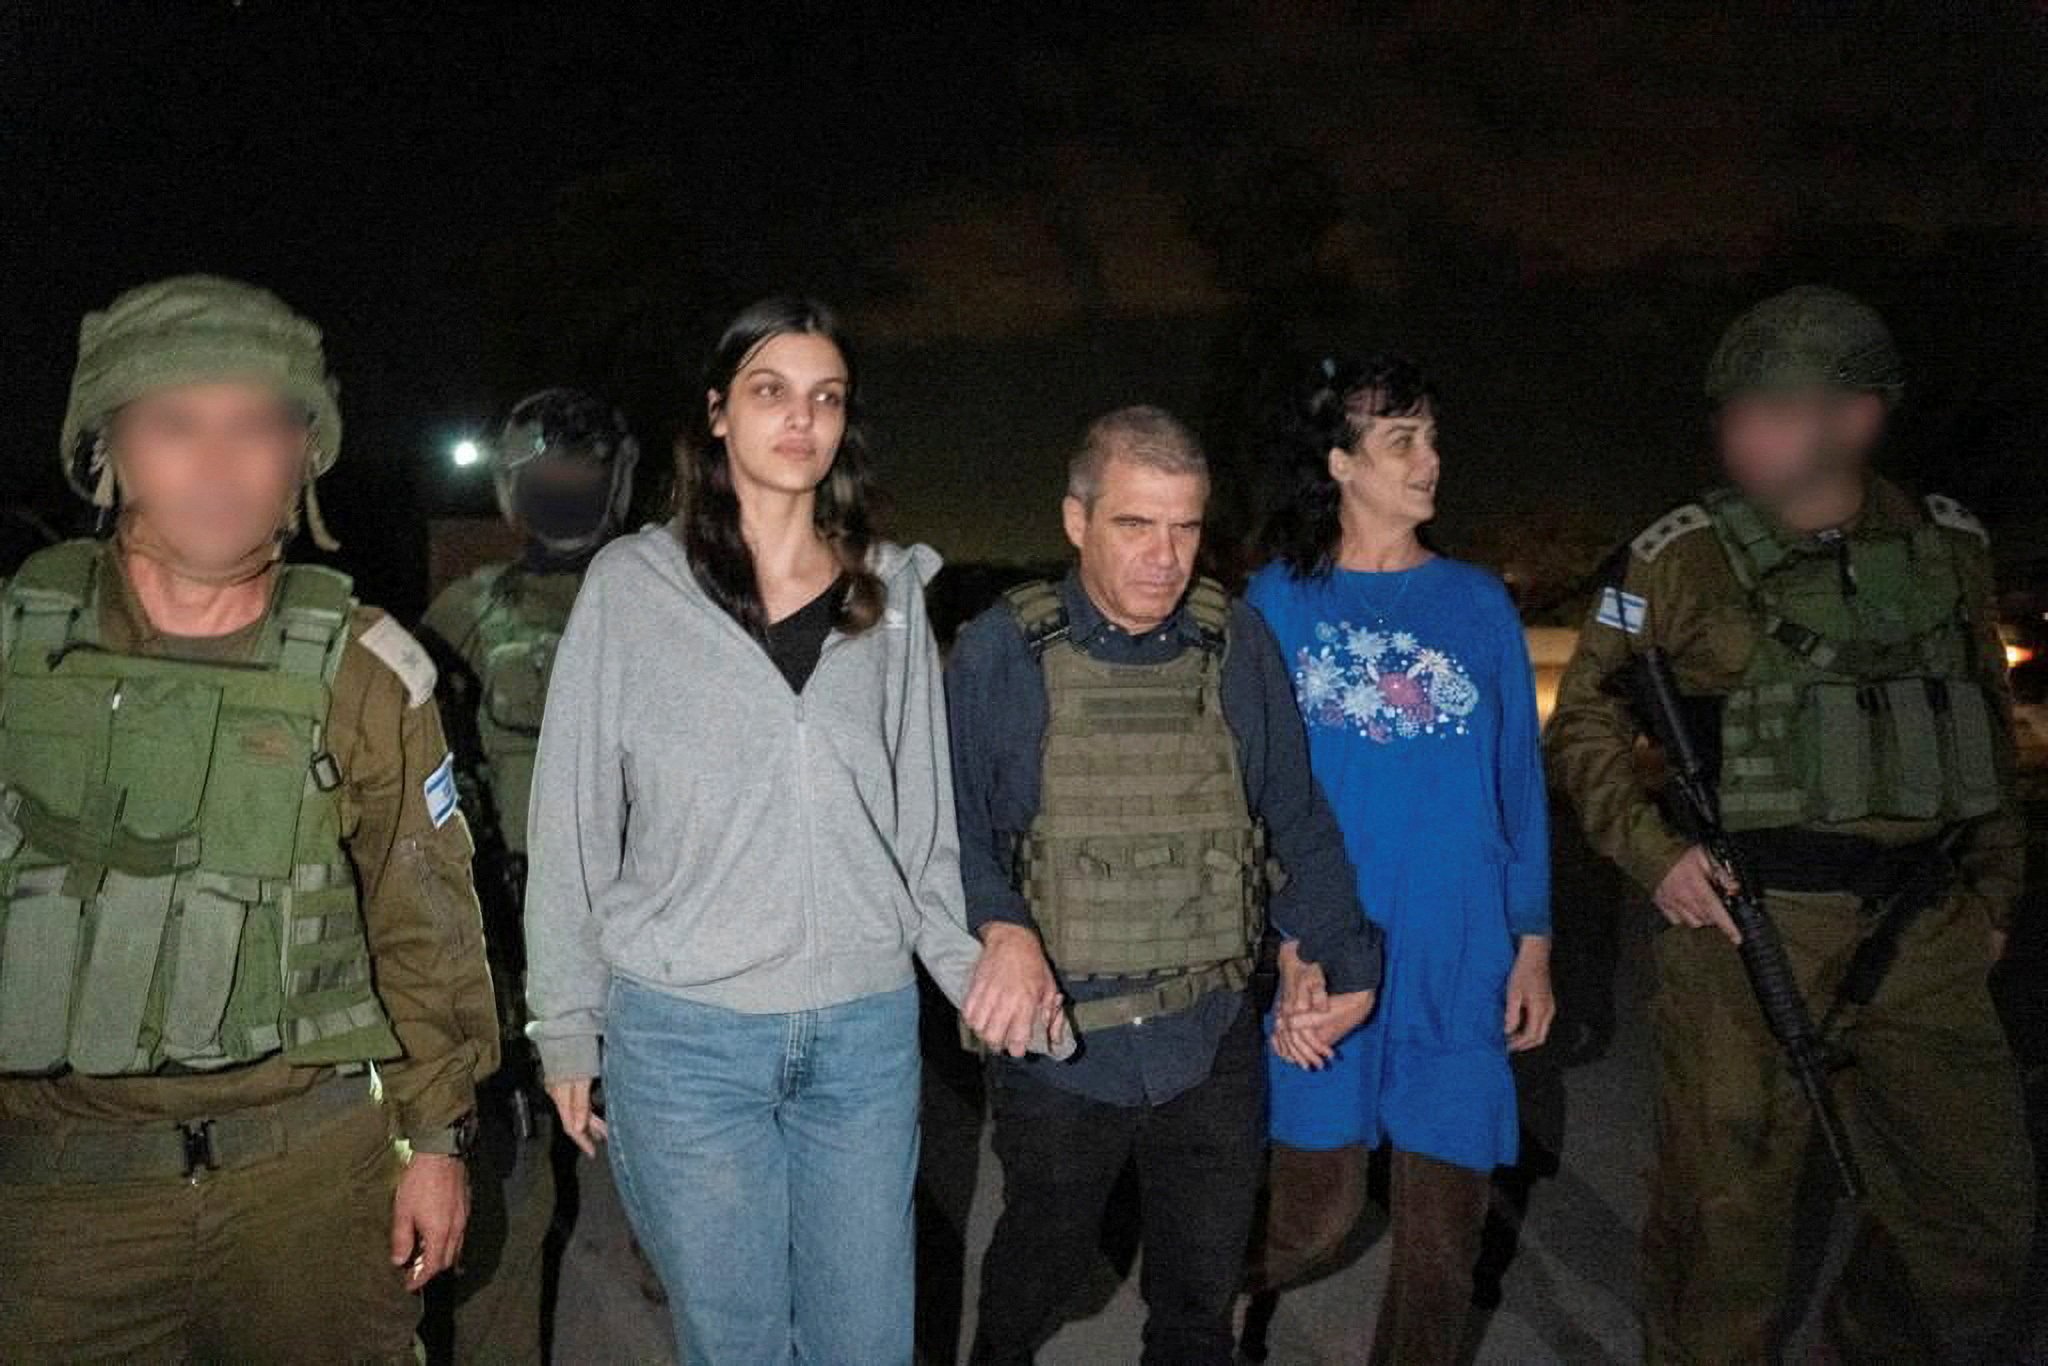 Judith Raanan and her daughter Natalie, US citizens who were taken as hostages by Hamas militants, walk while holding hands with Brigadier-General (Retired) Gal Hirsch, Israel’s coordinator for the captives and missing, after they were released. Photo: Government of Israel via Reuters